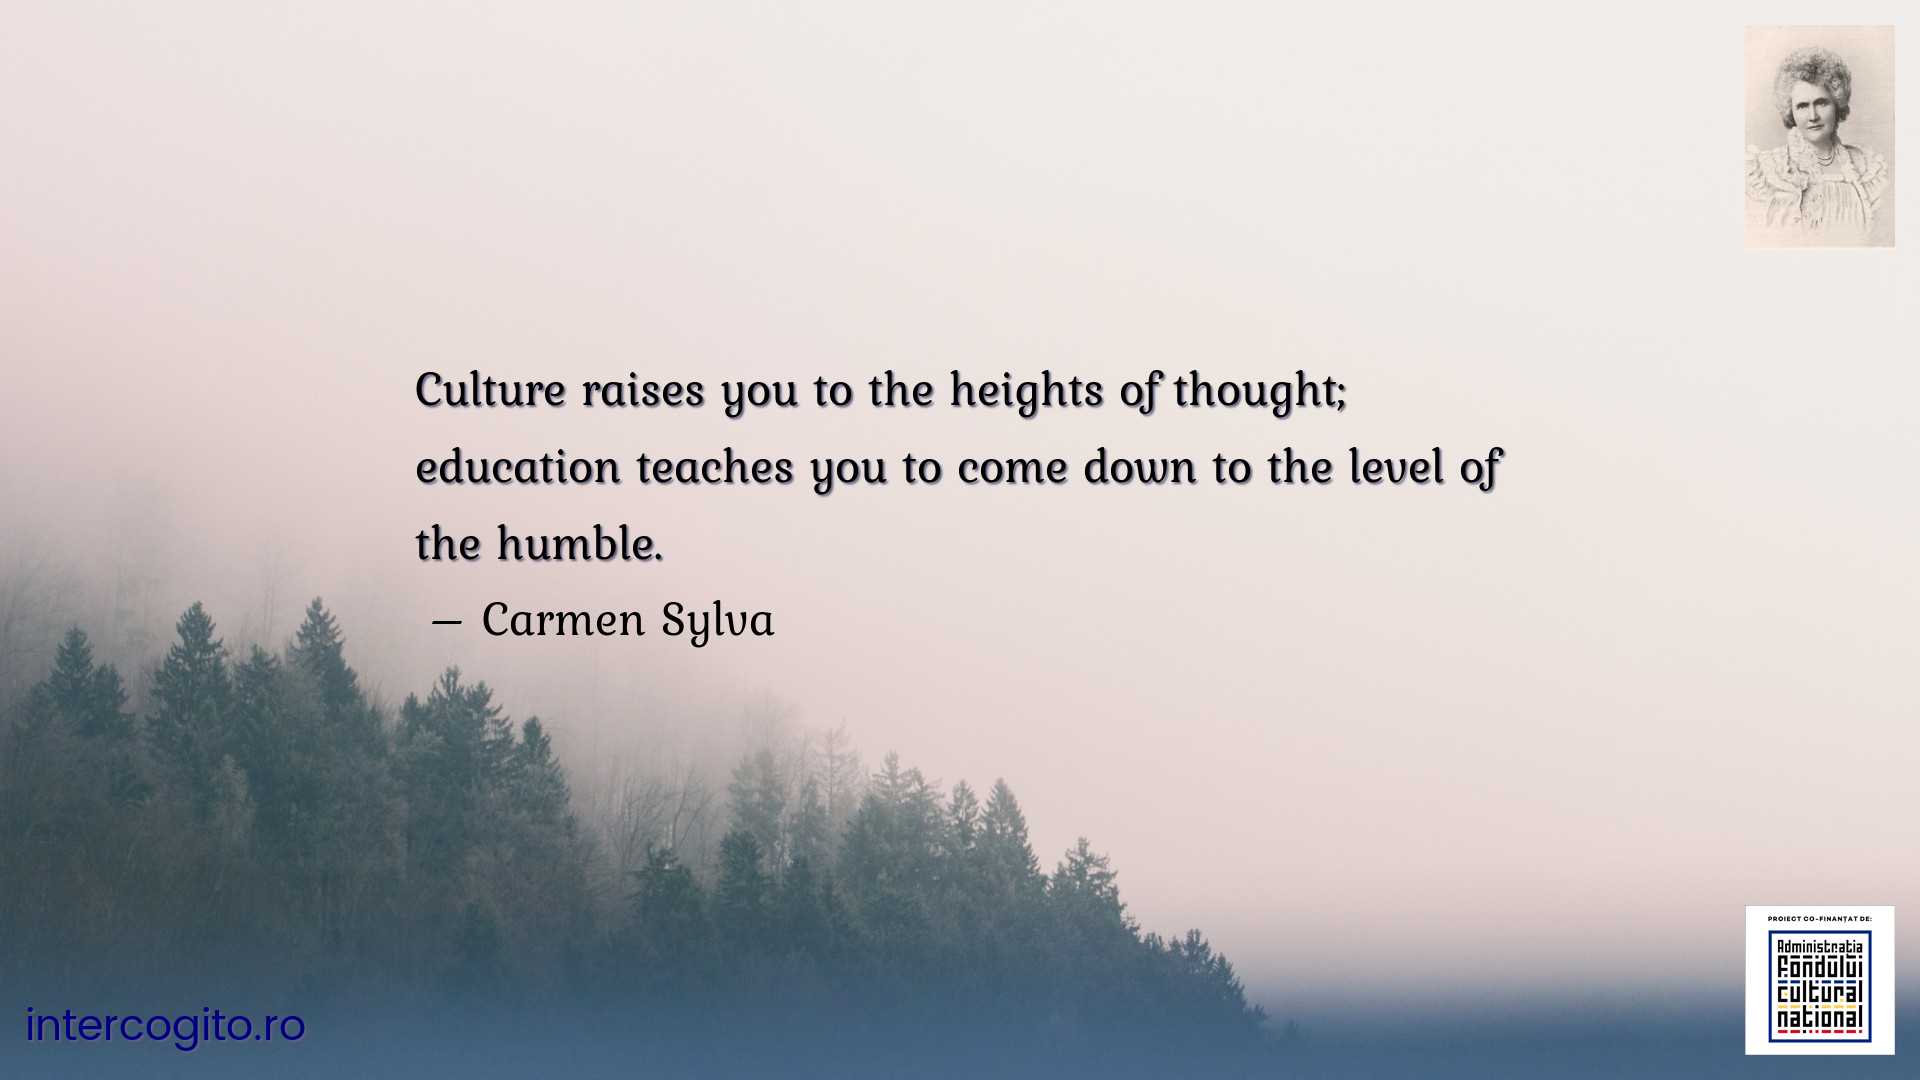 Culture raises you to the heights of thought; education teaches you to come down to the level of the humble.